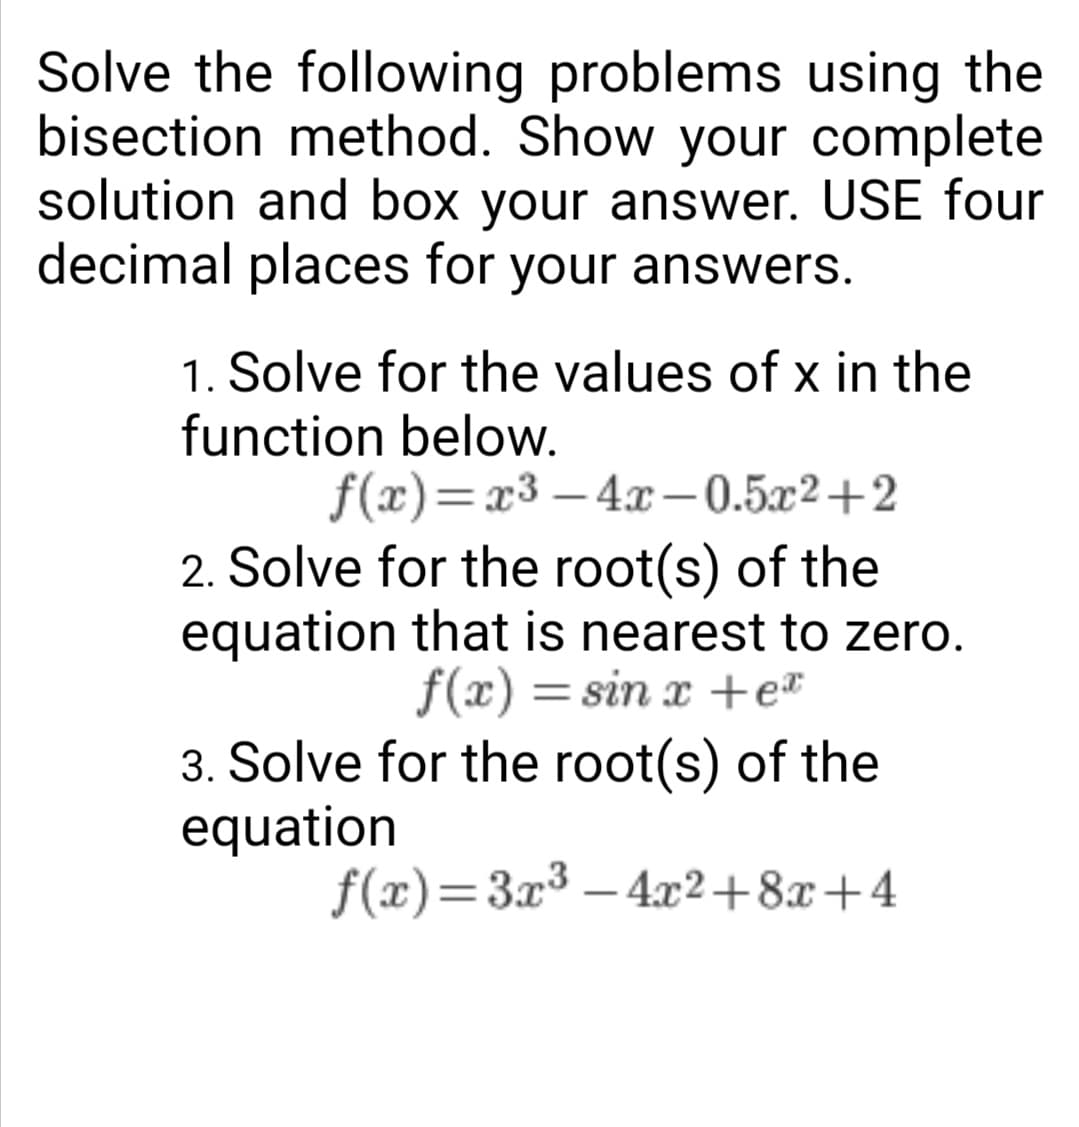 Solve the following problems using the
bisection method. Show your complete
solution and box your answer. USE four
decimal places for your answers.
1. Solve for the values of x in the
function below.
f(x)=x³-4x-0.5x2+2
2. Solve for the root(s) of the
equation that is nearest to zero.
f(x)=sin x +ex
3. Solve for the root(s) of the
equation
f(x)=3x³-4x²+8x+4